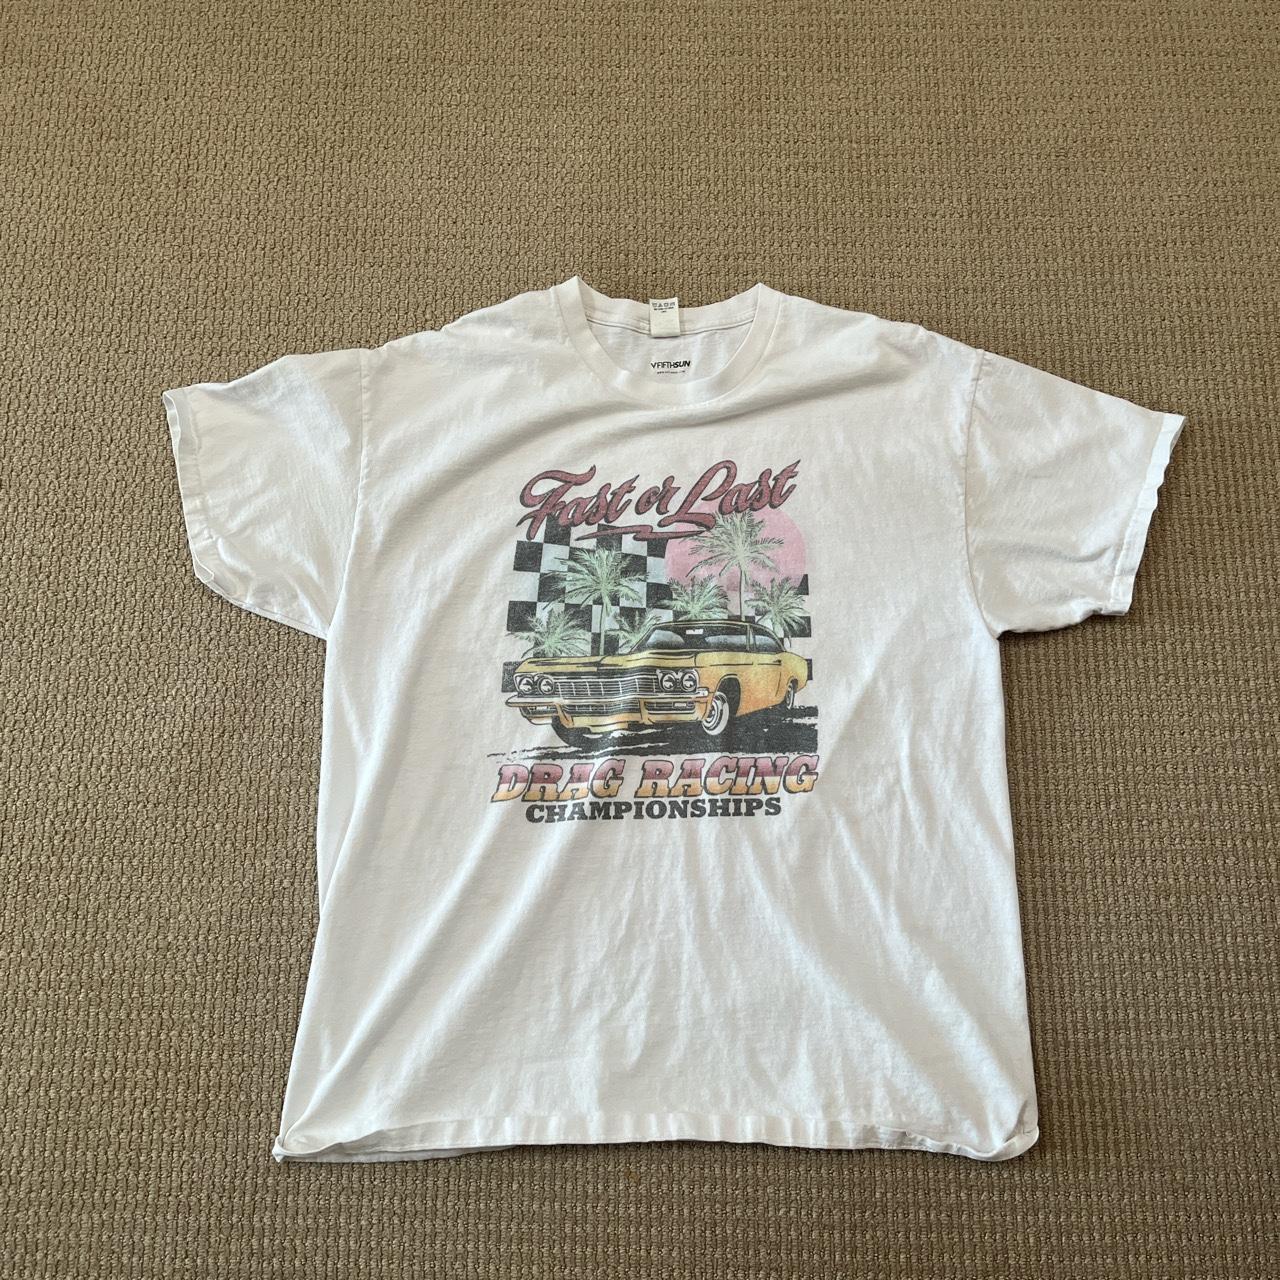 Sick t shirt In perfect condition - Depop